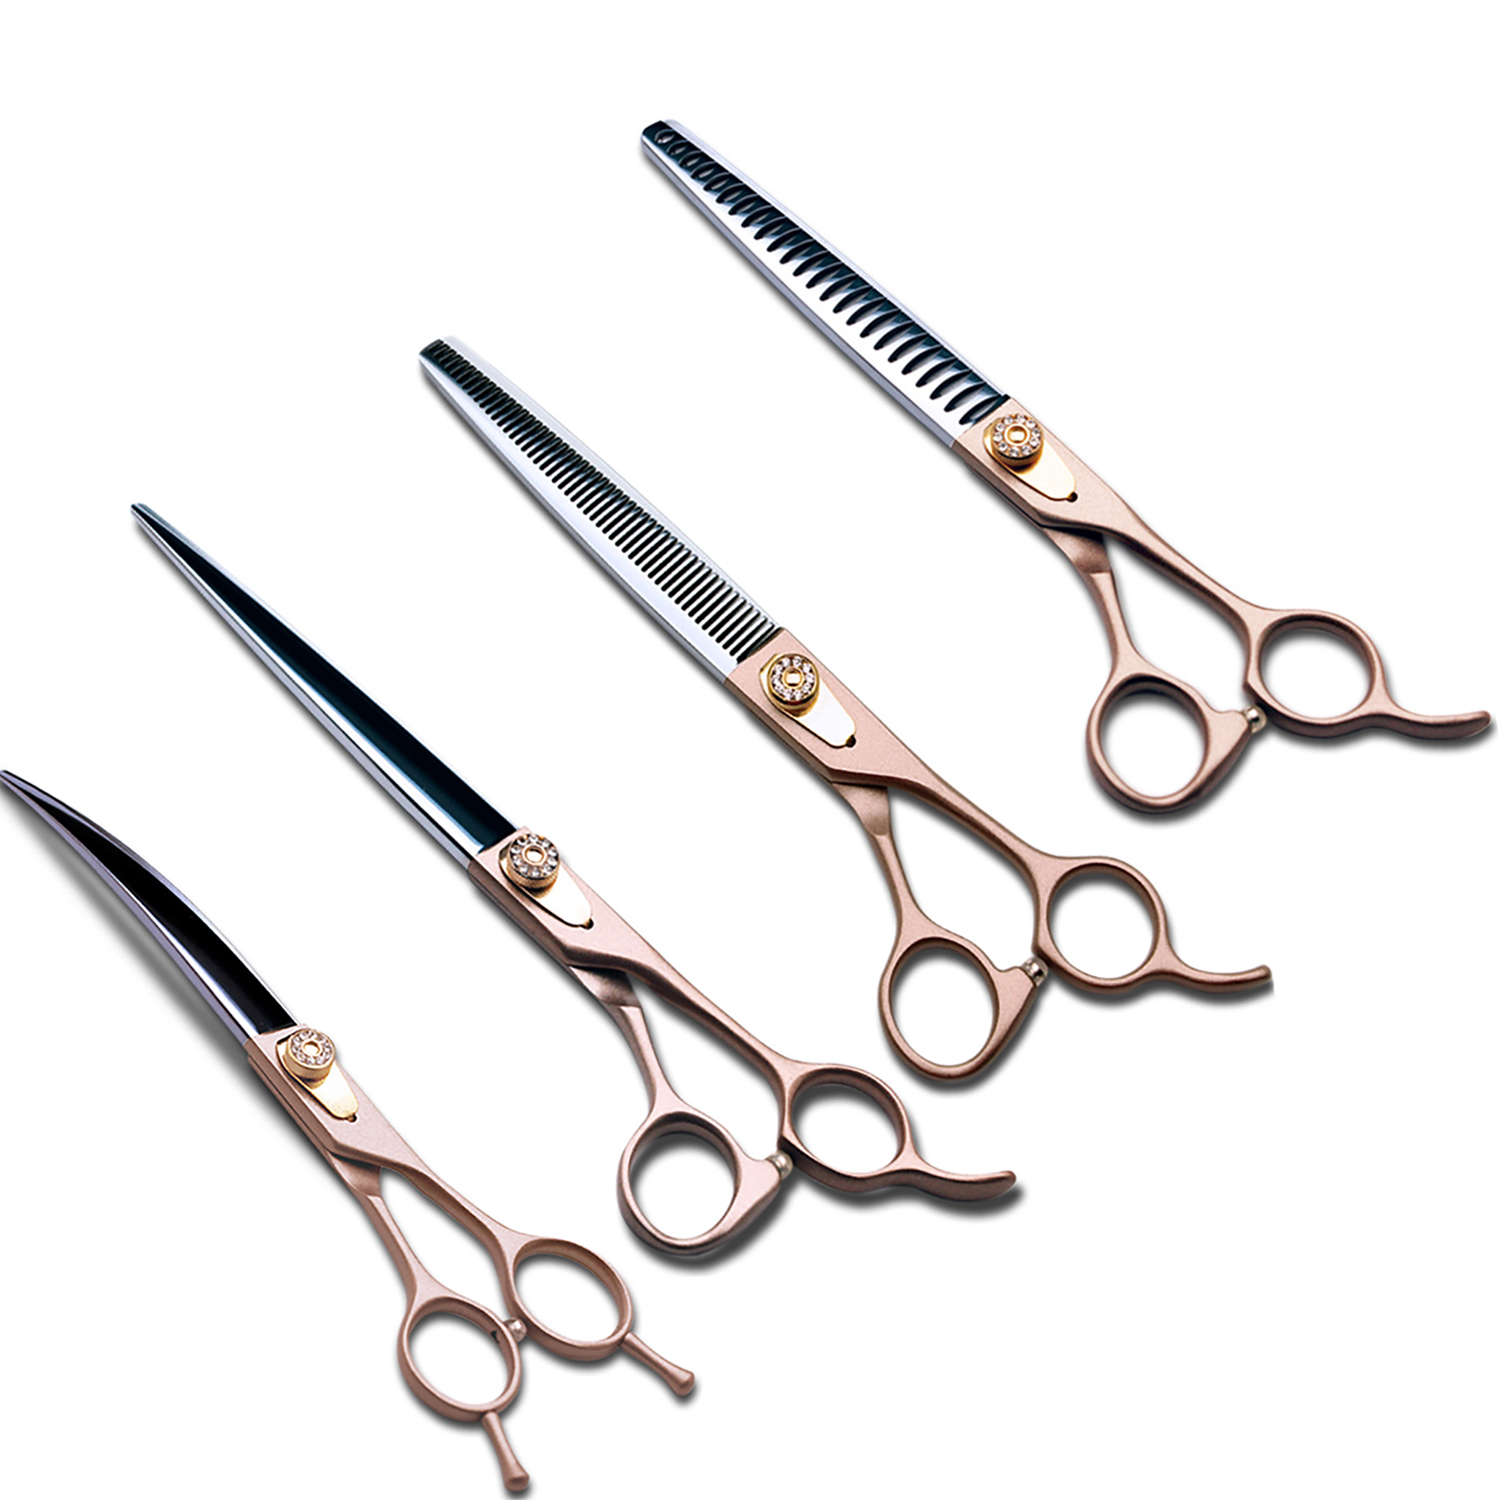 High quality Professional Pet Grooming Scissors Sets 7inch/7.5inch/8inch can be customized